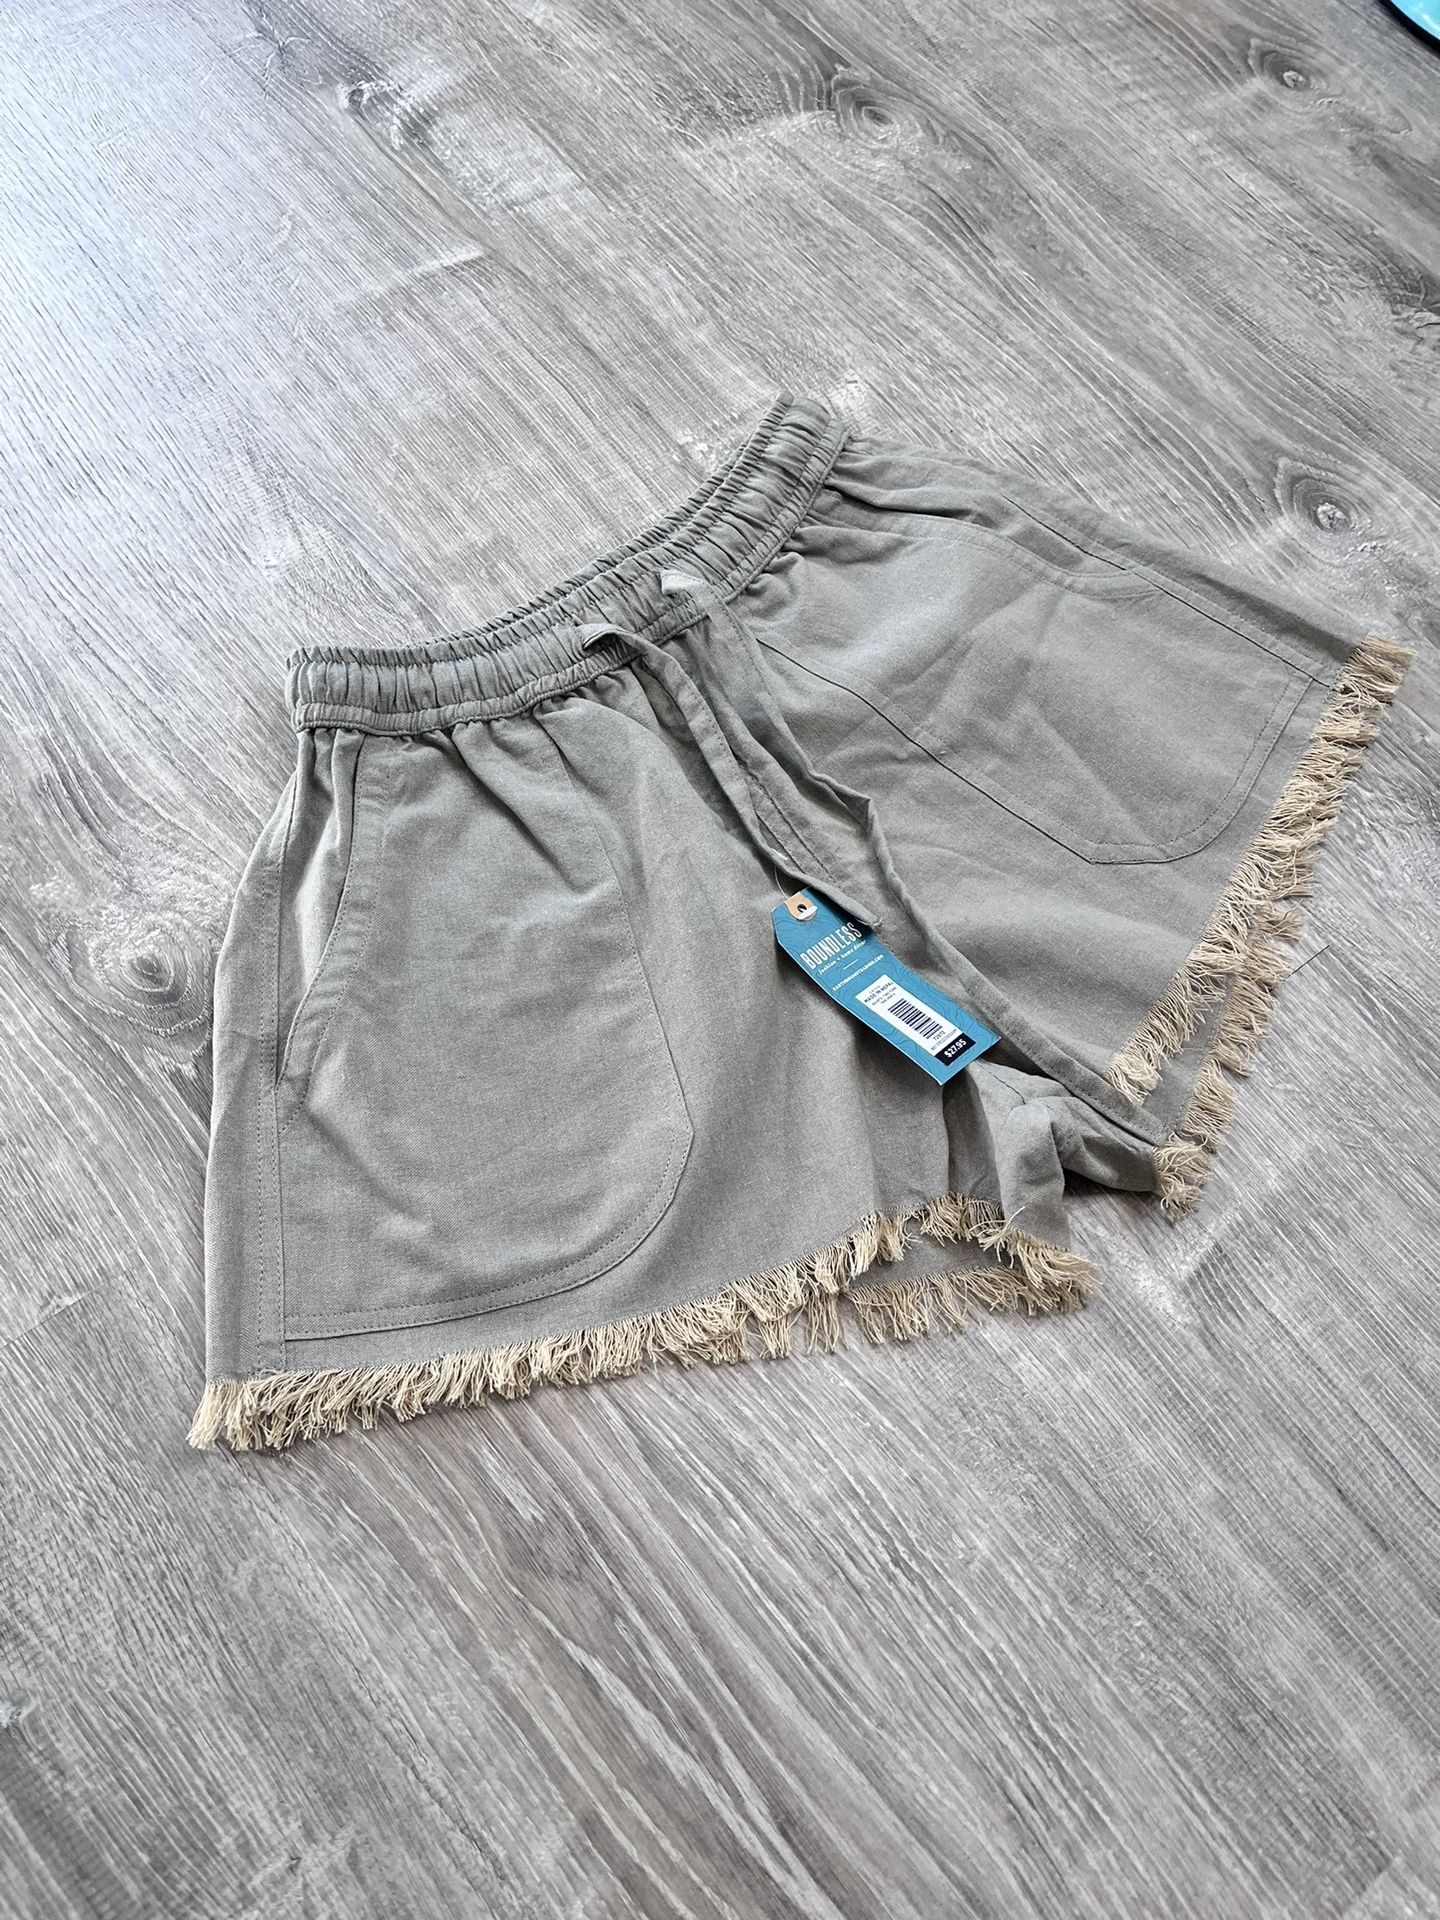 Earthbound Trading Co Small Sage Green Mini Raw Hemline Casual Summer Shorts 100% Cotton NWT!